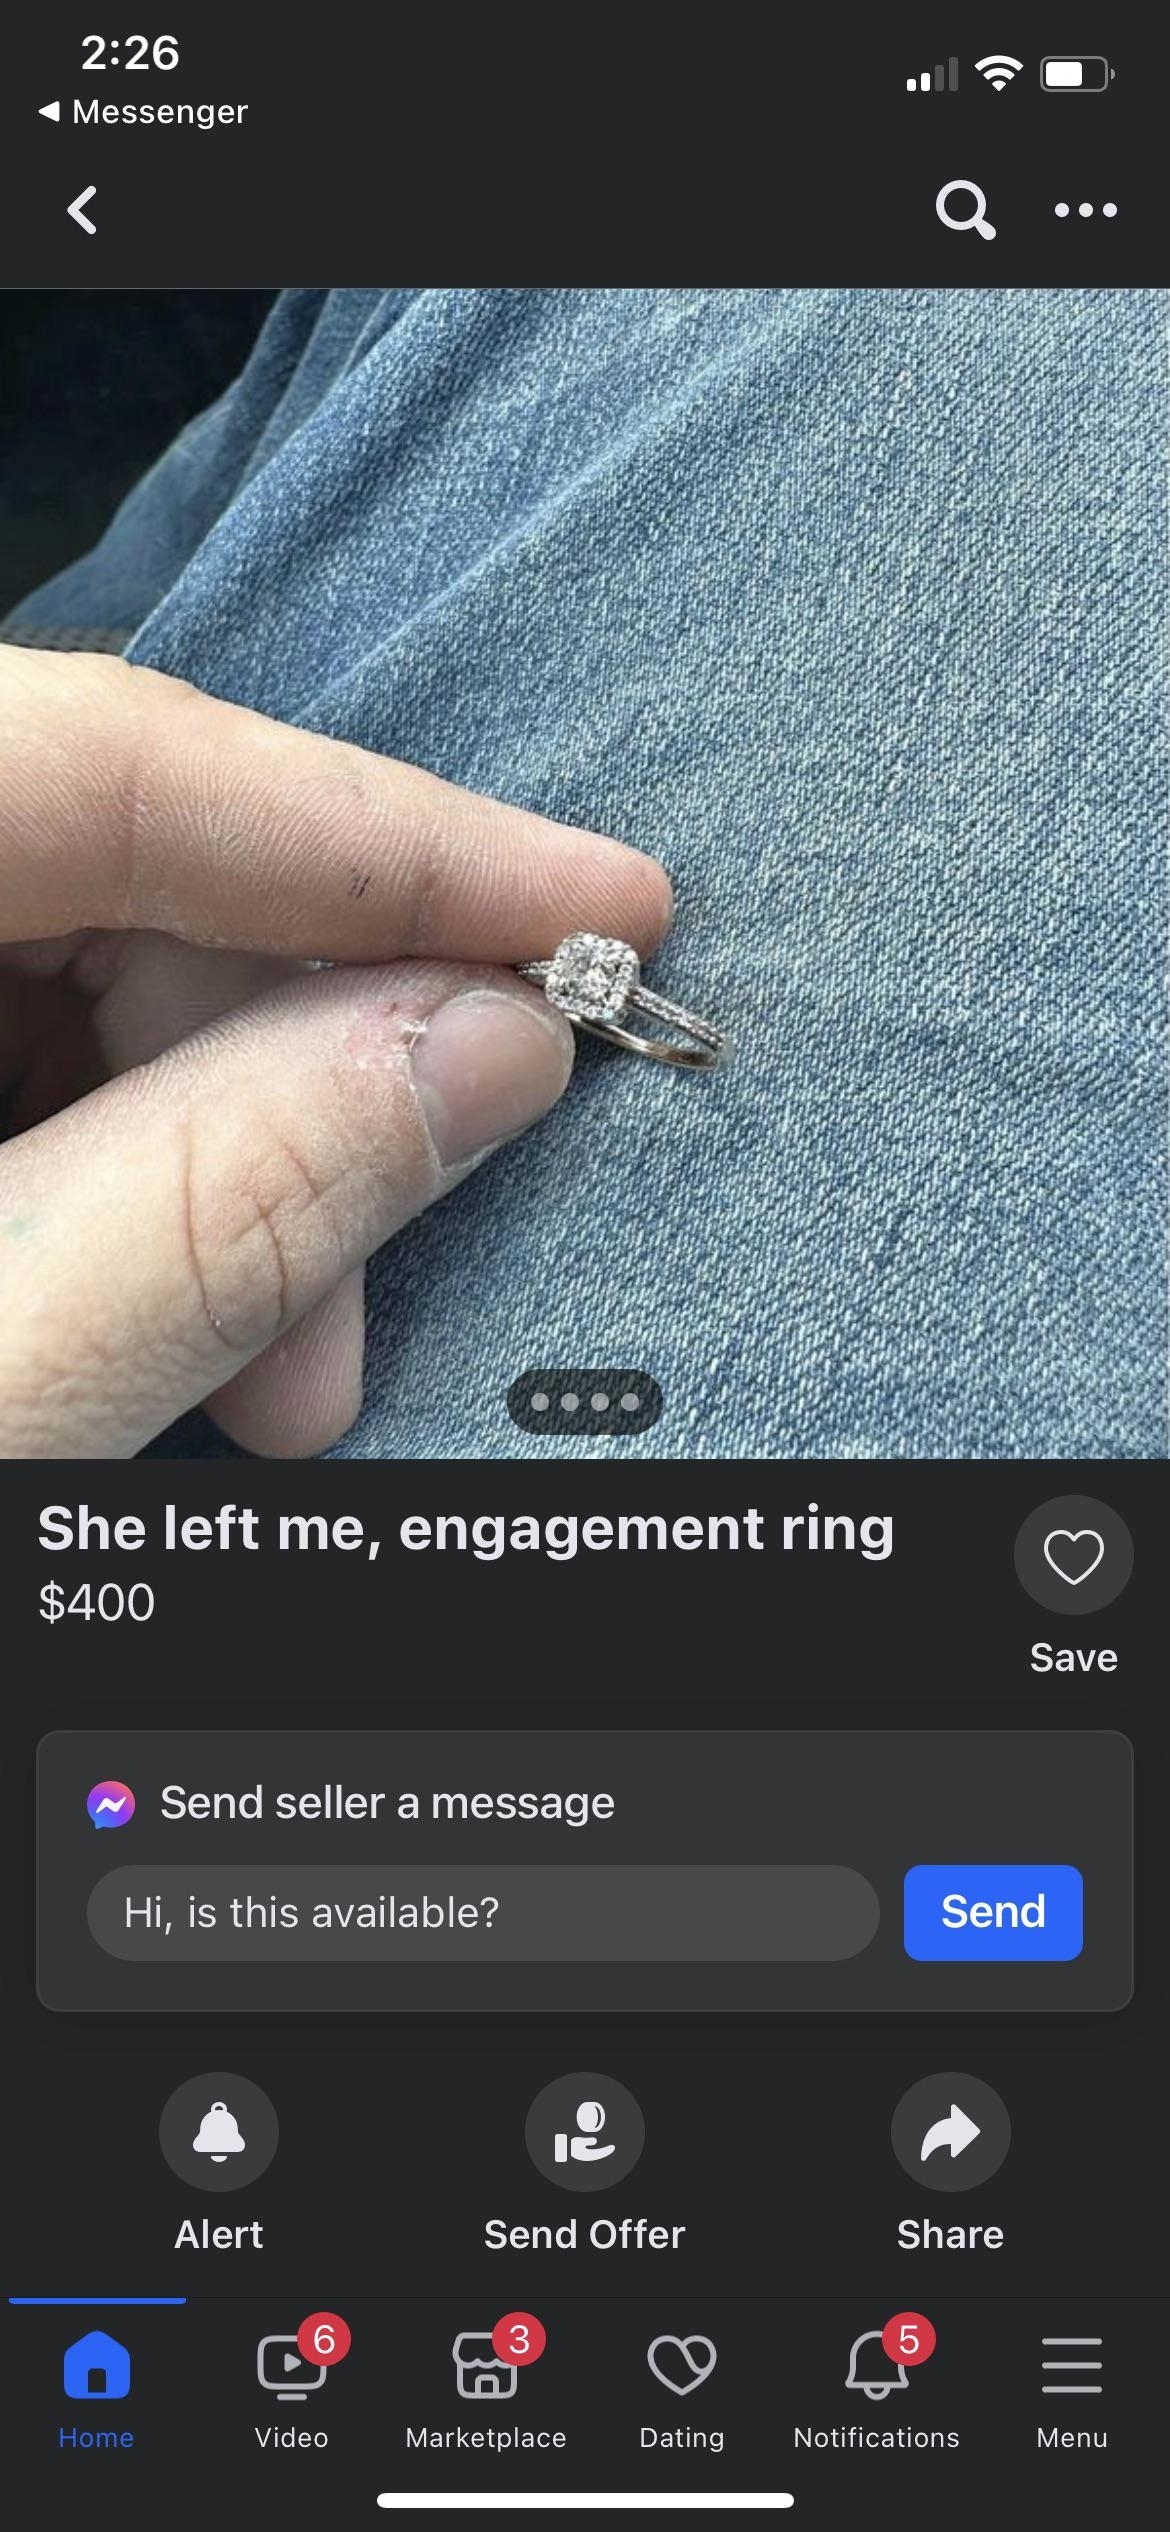 Person's hand holding an engagement ring against jeans. Facebook Marketplace listing reads: "She left me, engagement ring $400." with options to message the seller and interact with the post